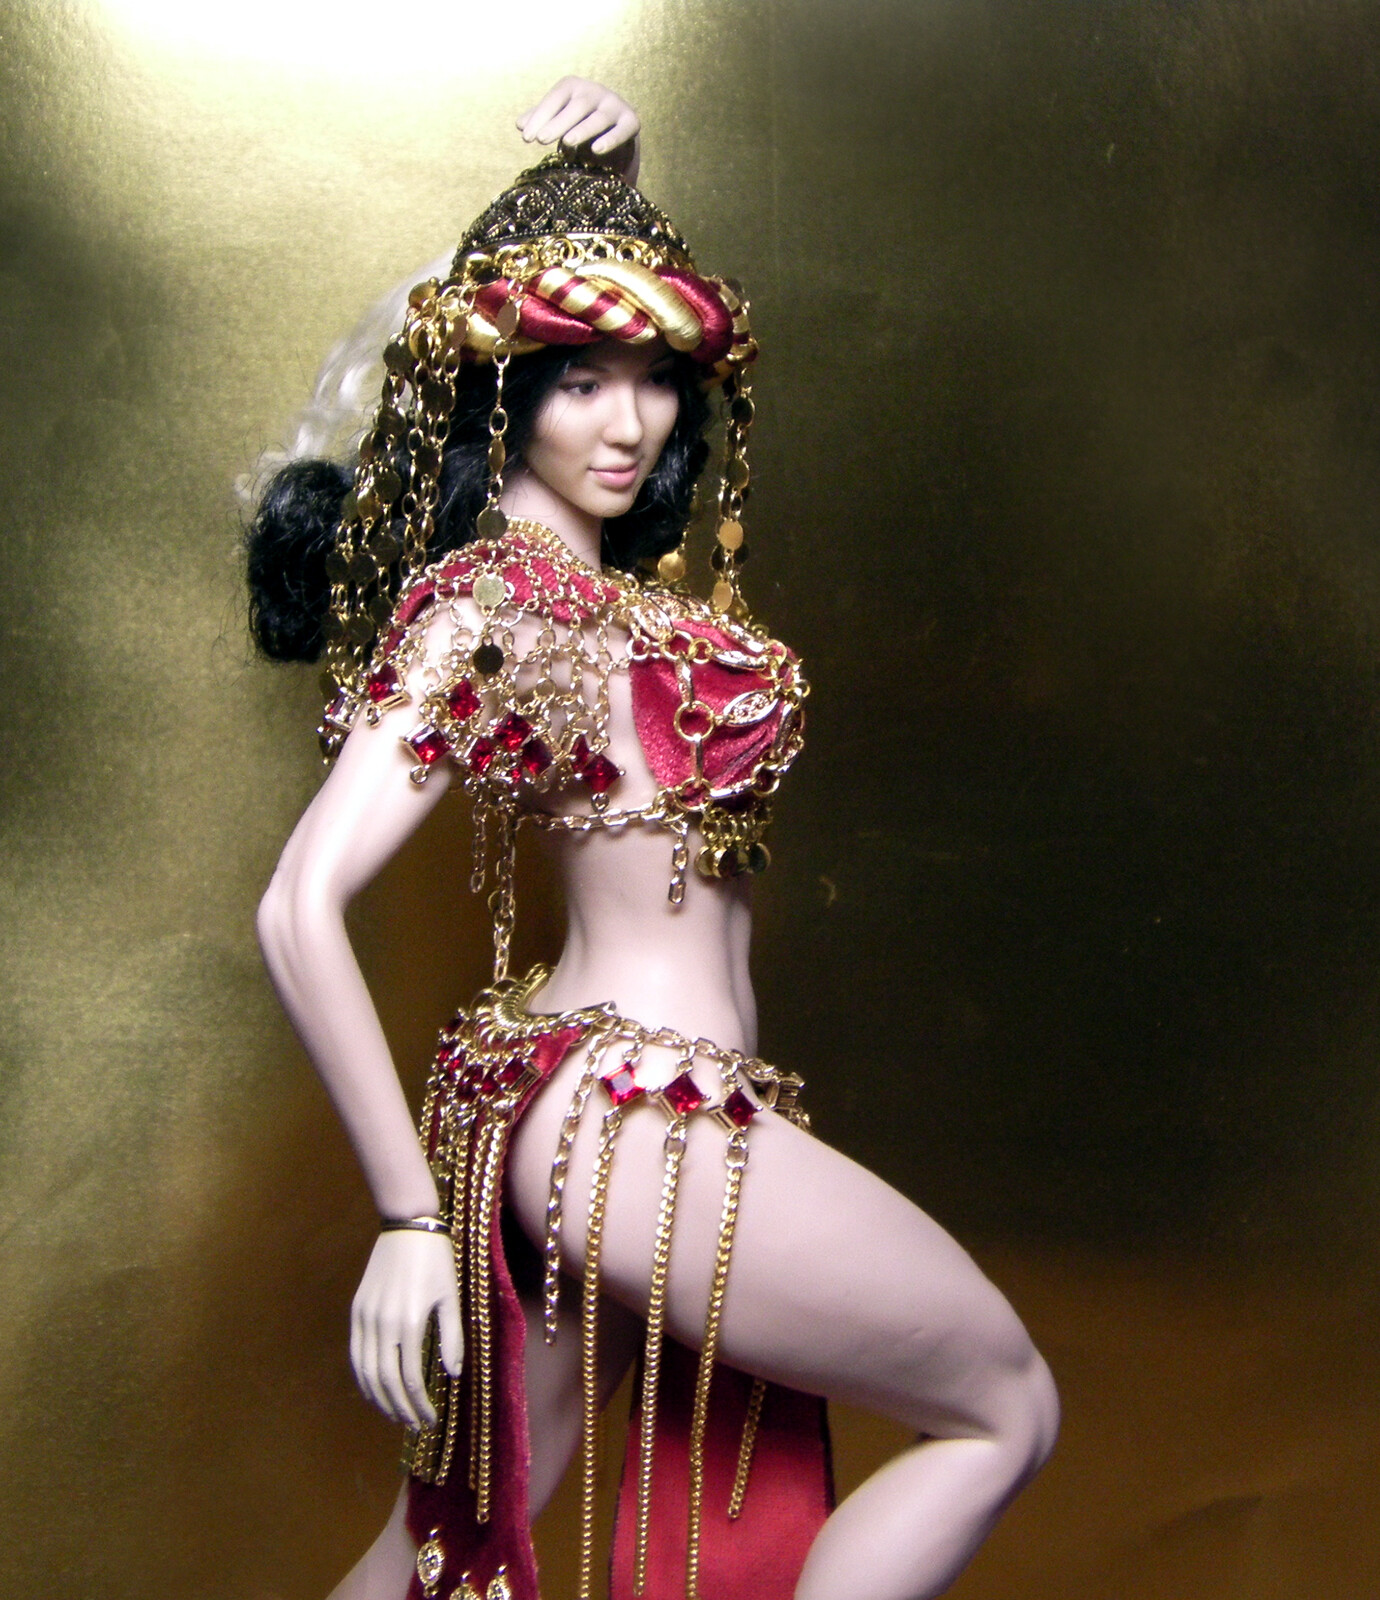 DOLL IN ARMOR - Costume for TBLeague Phicen doll.